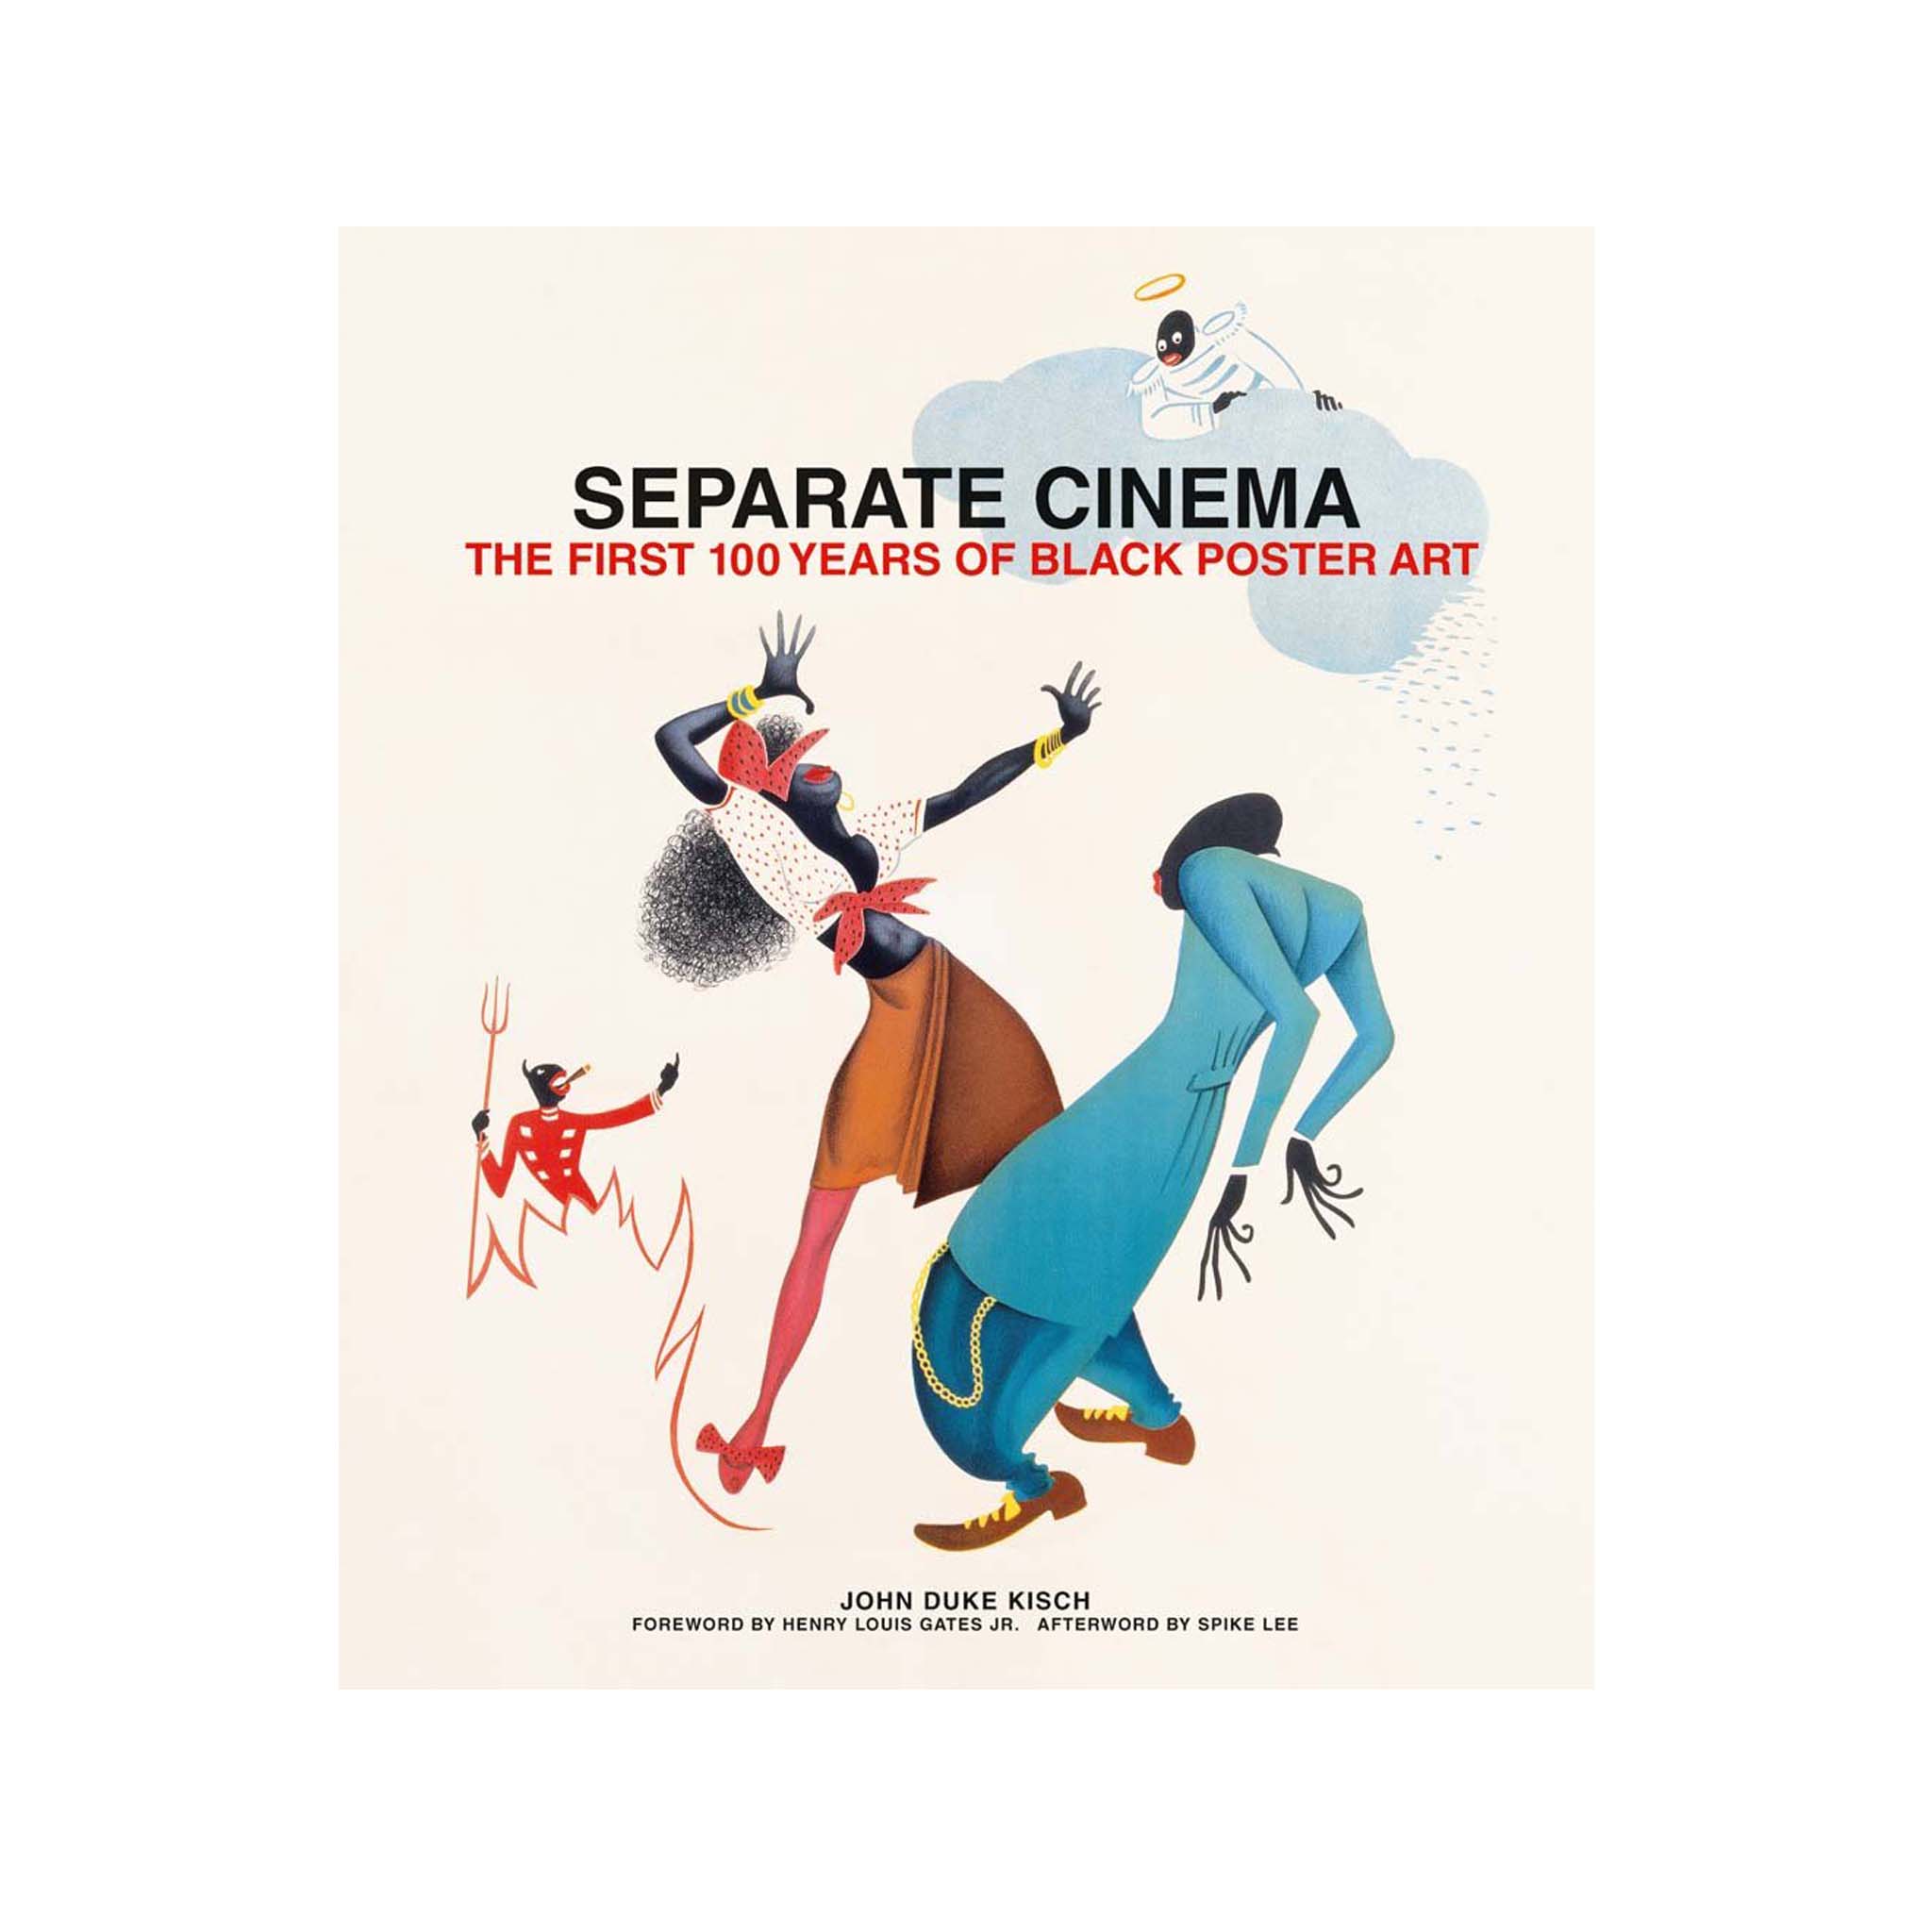 SEPARATE CINEMA: THE FIRST 100 YEARS OF BLACK POSTER